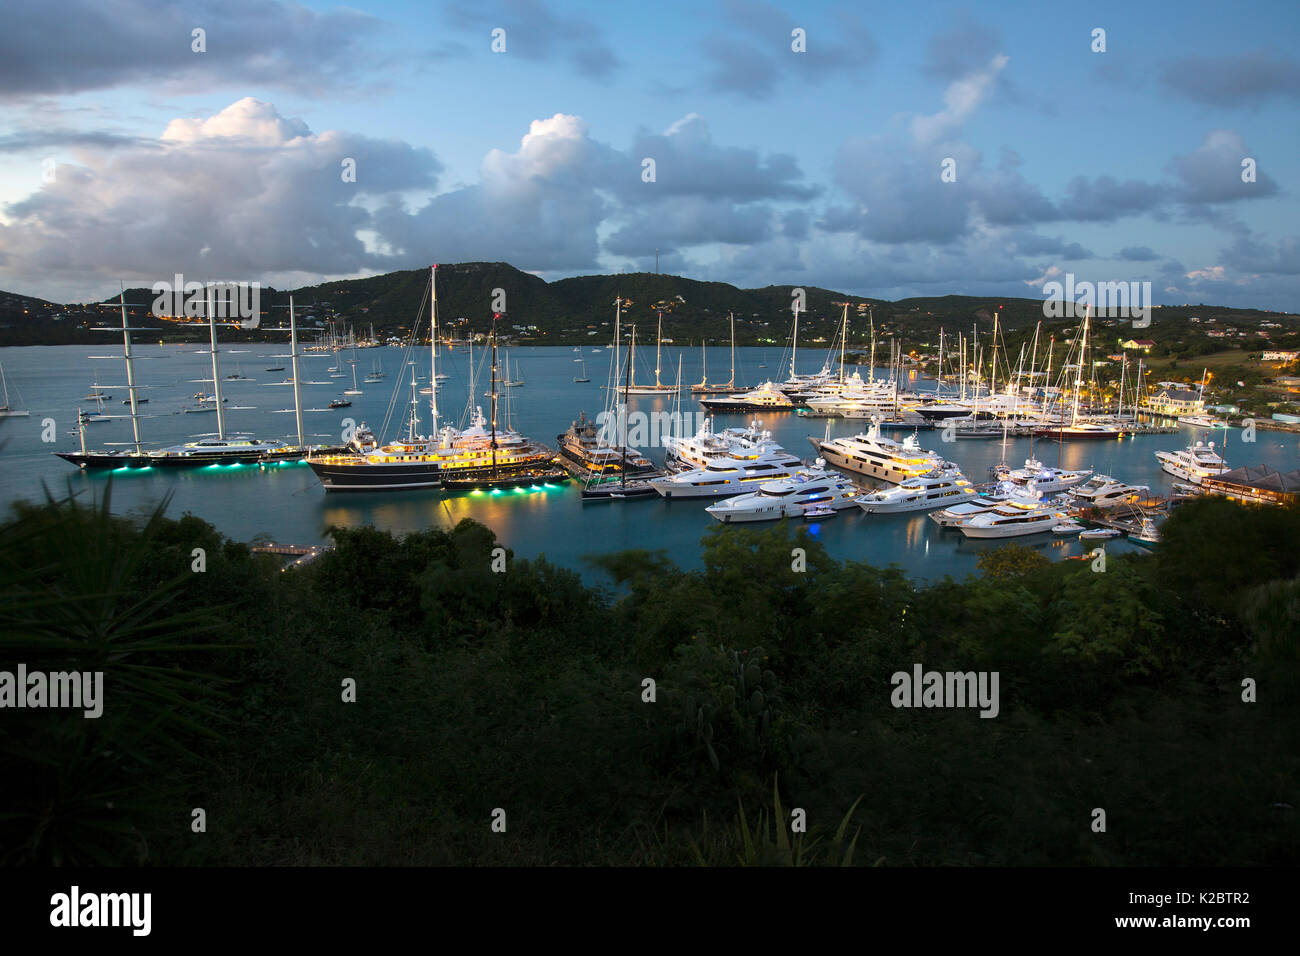 Boats moored in Falmouth Harbor, Antigua. December 2012. Stock Photo